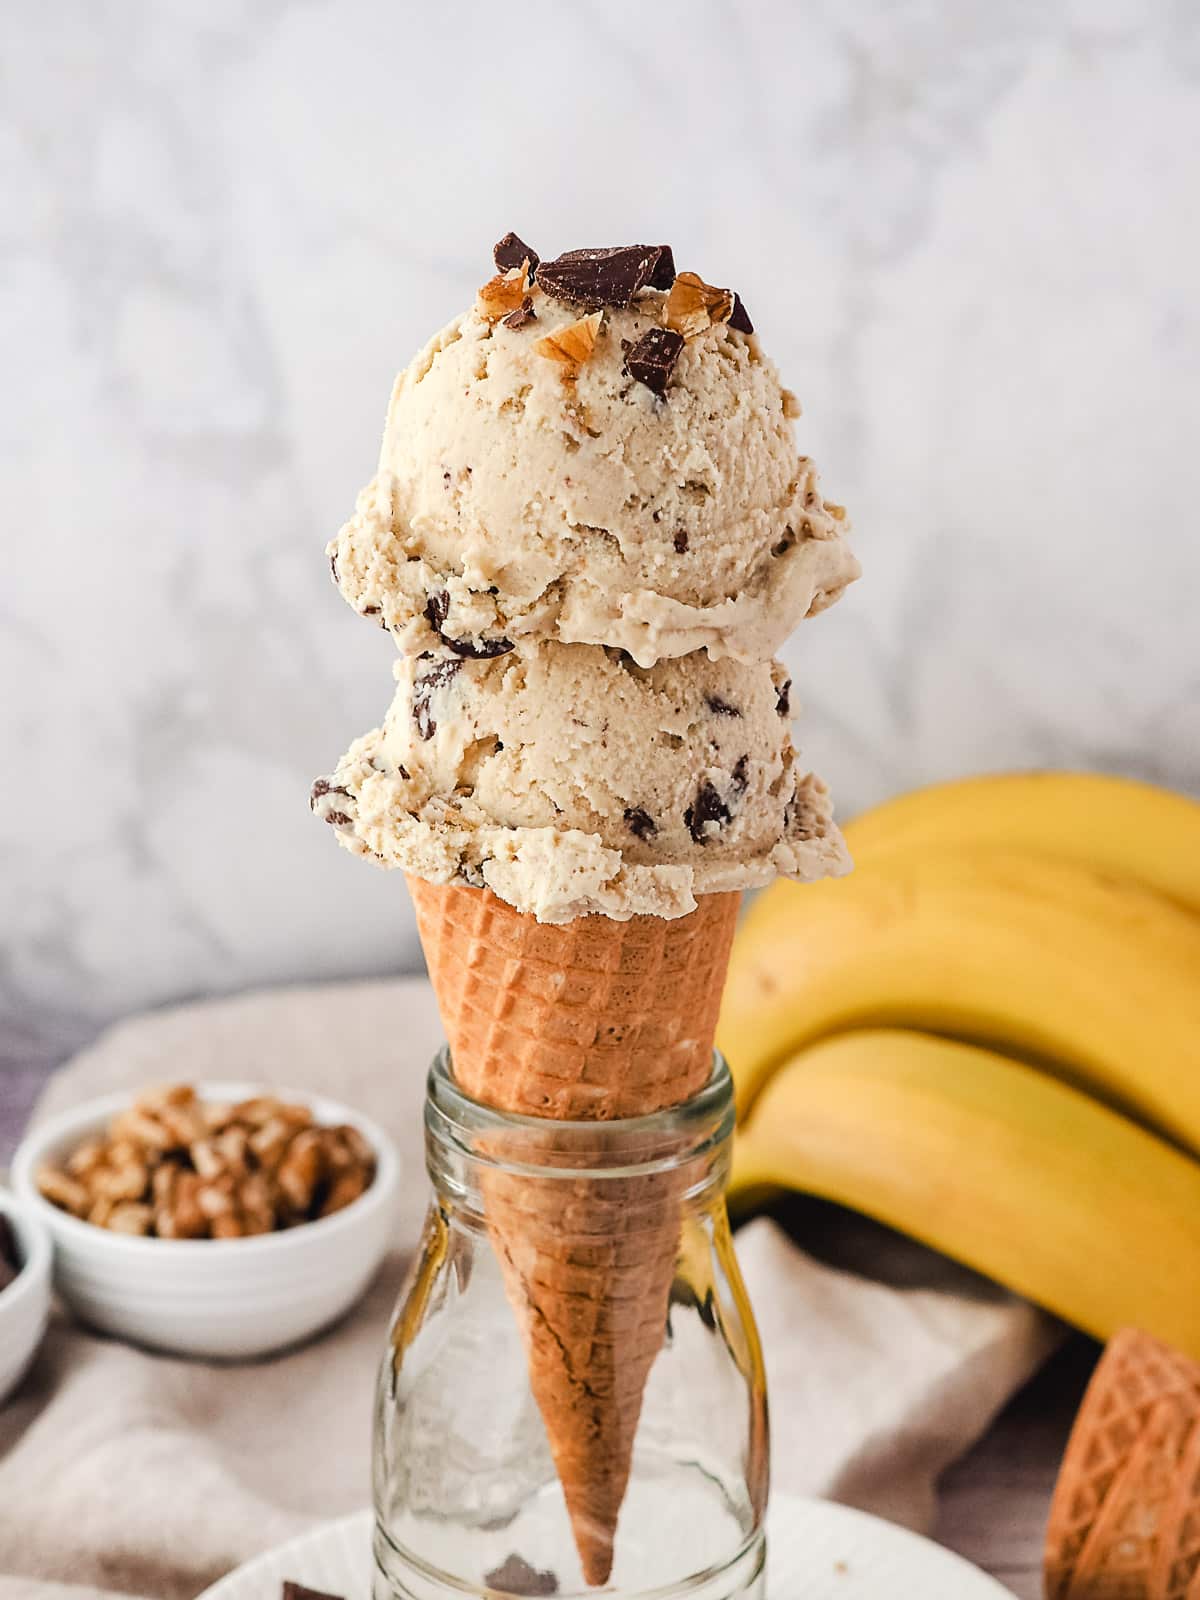 Two scoops of ice cream in a cone, with bananas, walnuts and chocolate chunks in the background.